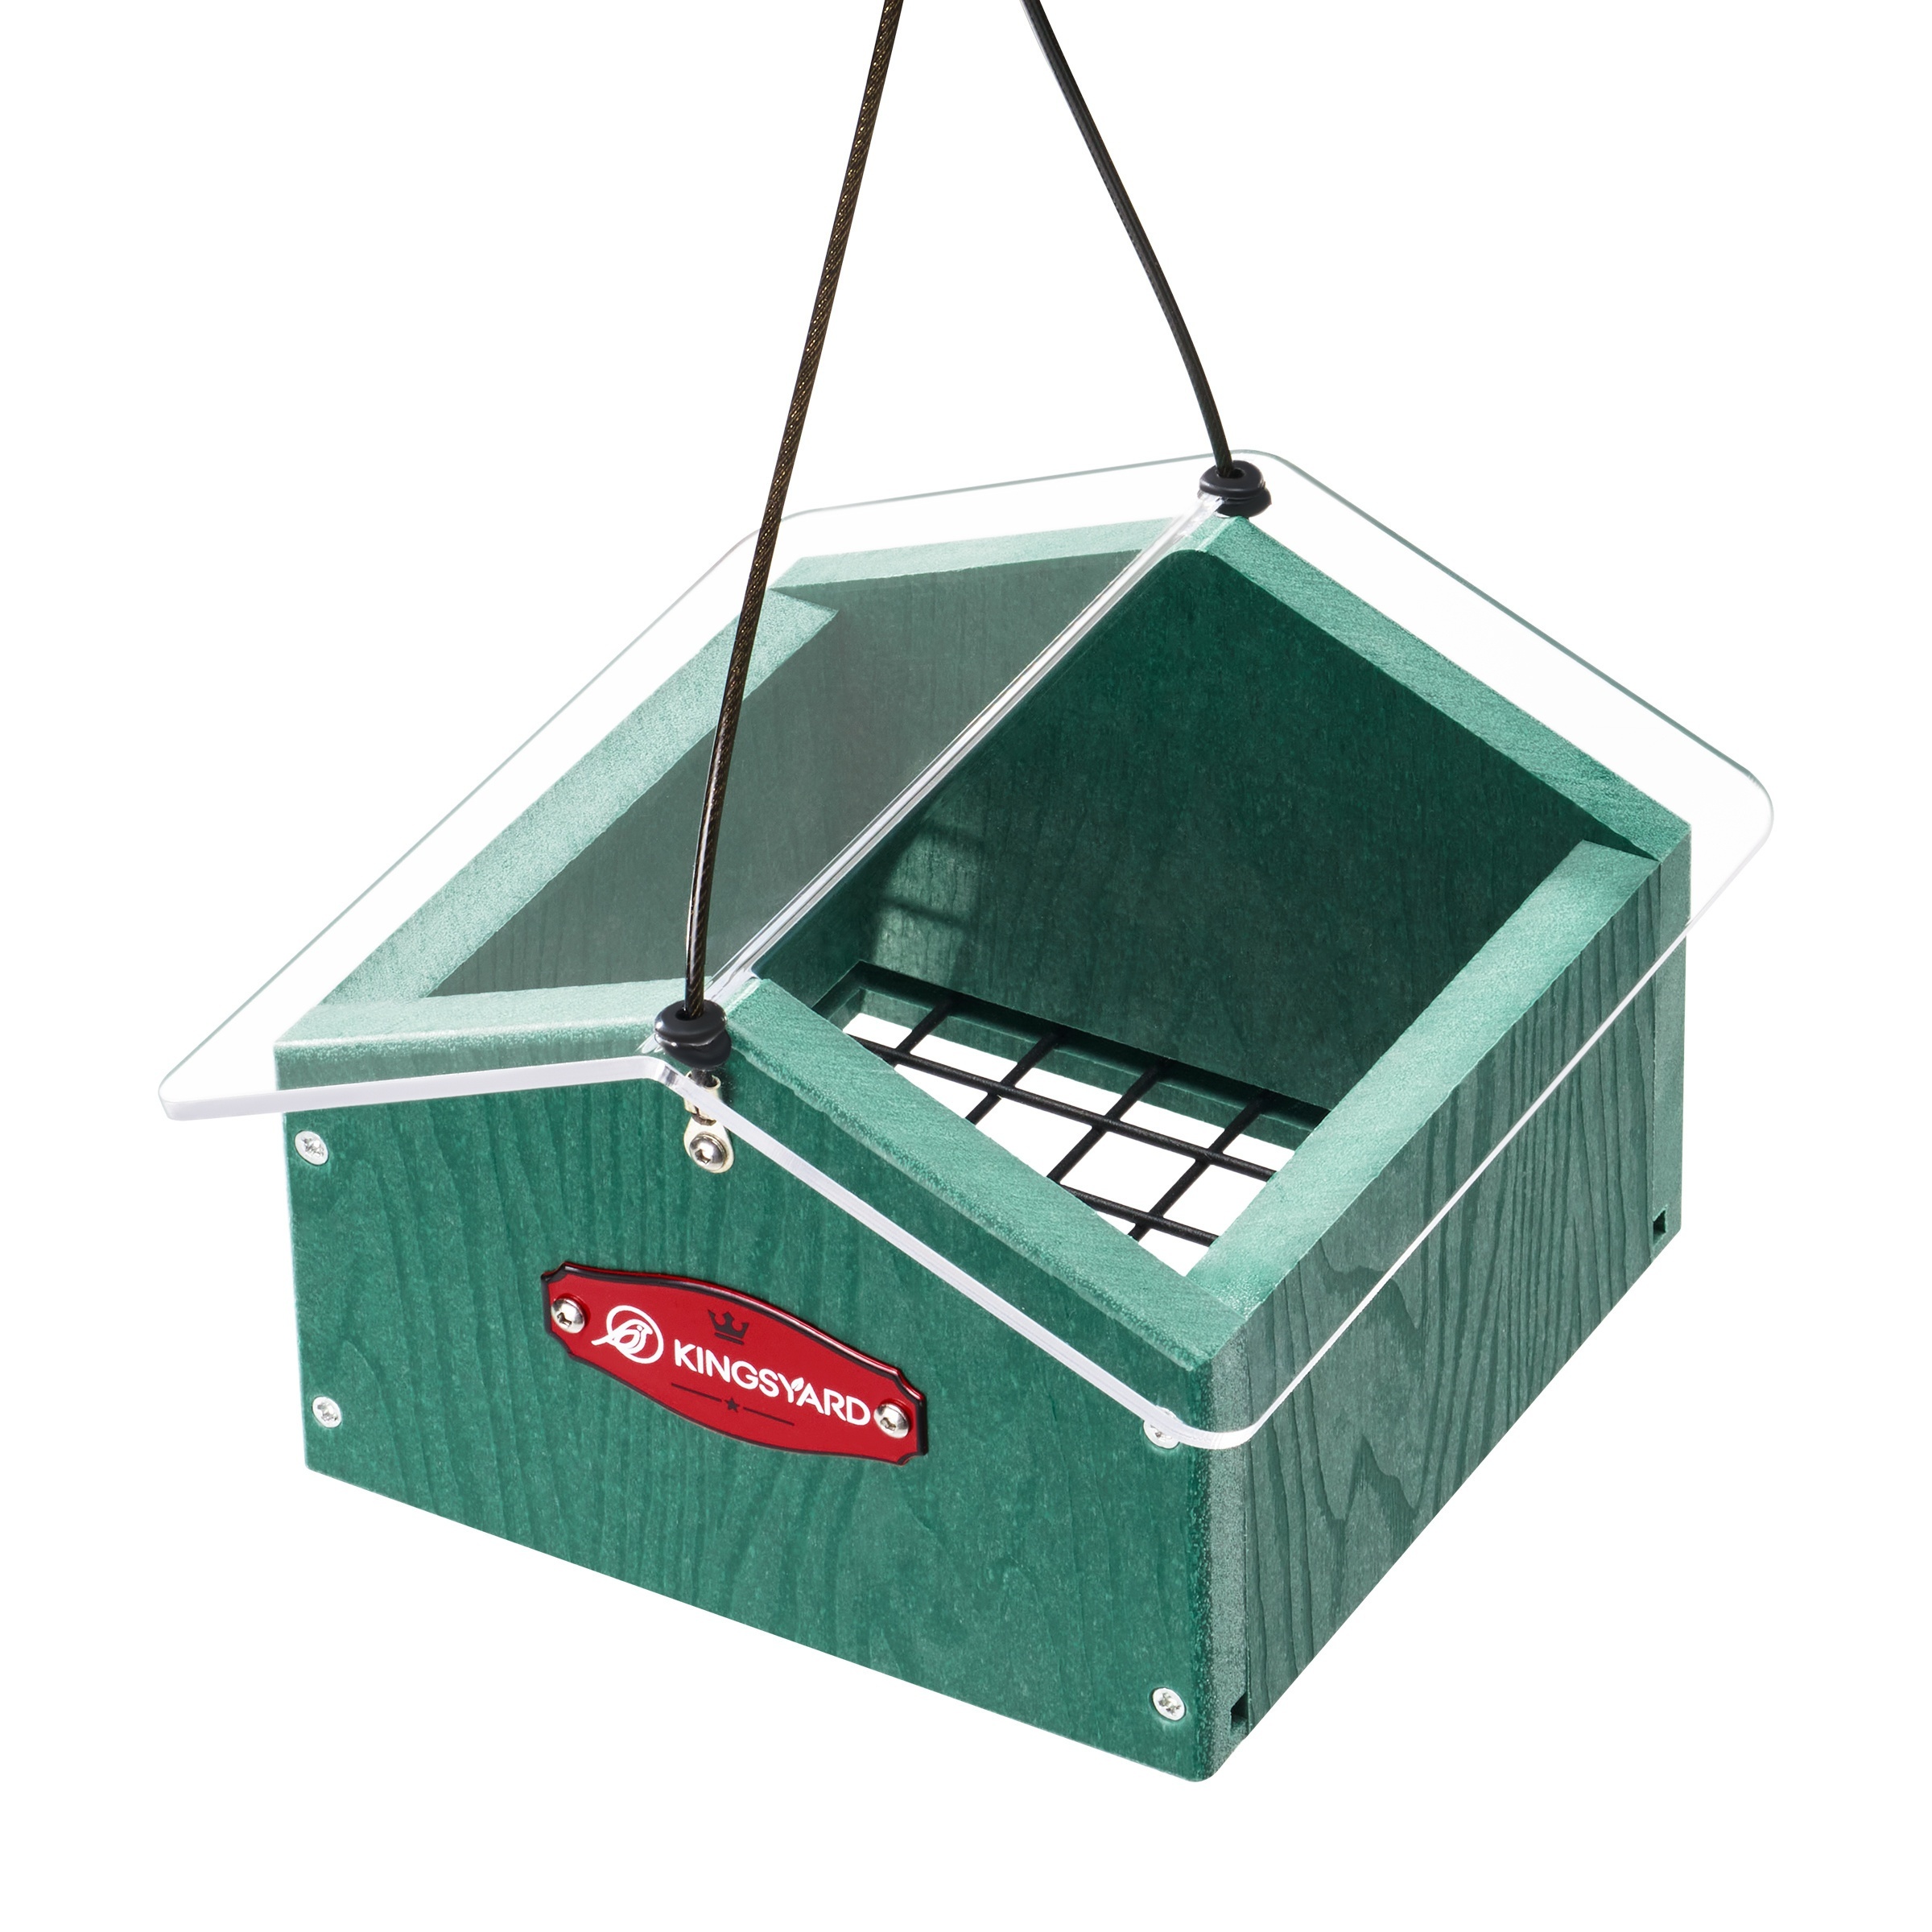 

Kingsyard Upside Down Double Feeder For Outside Hanging - Recycled Plastic Wild Bird Feeder With Rainproof Roof For Attracting Woodpeckers Nuthatches Chickadees Finches